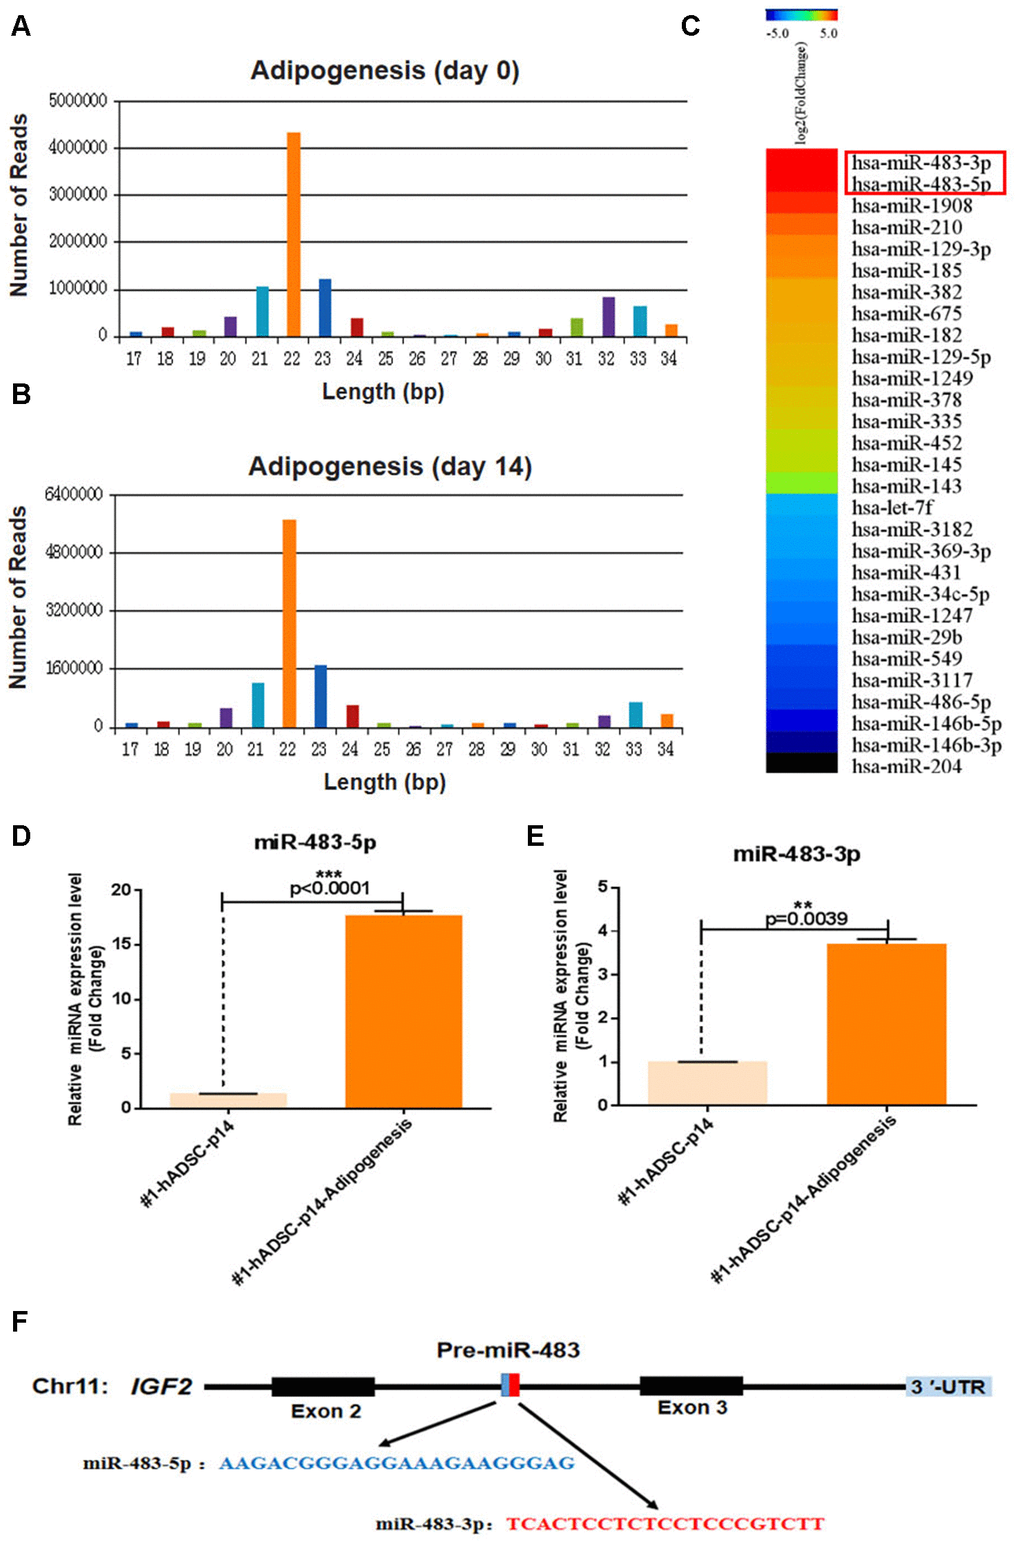 MiR-483 expression during the adipogenic differentiation of hADSCs. (A, B) Small-RNA sequencing was performed to profile miRNAs with variant expression during adipogenic differentiation of hADSCs. Data are expressed as the number of reads and (C) differentially expressed miRNA genes. (D, E) The relative expression of miR-483-5p and miR-483-3p was validated by RT-qPCR. (F) The location and classification of miR-483.